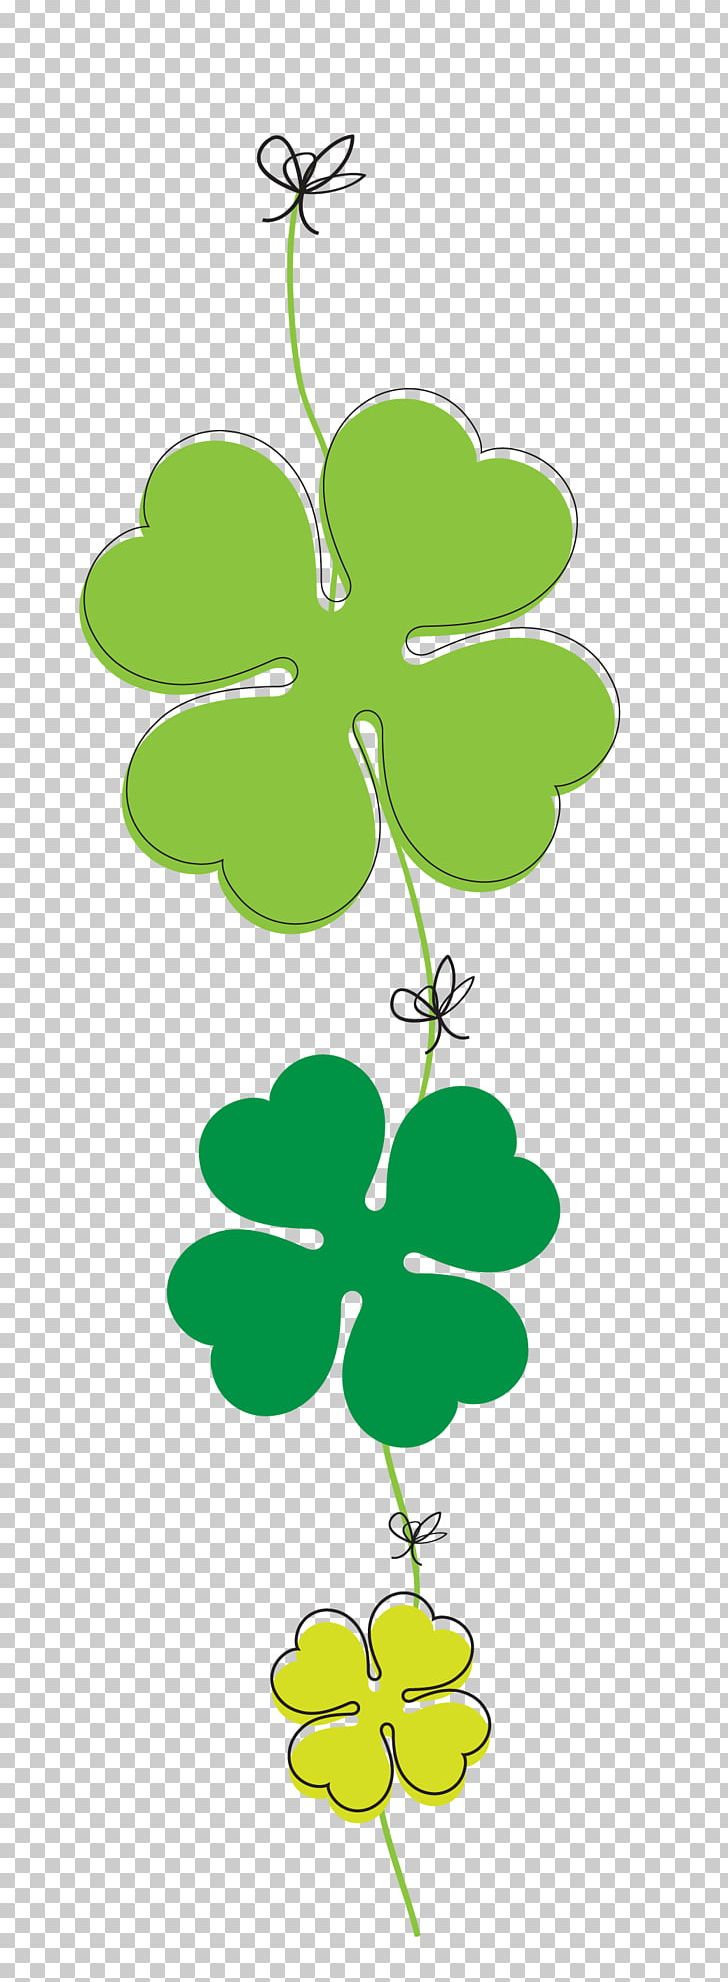 Four-leaf Clover PNG, Clipart, Branch, Casino, Clover, Clover Border, Clover Decorative Pattern Free PNG Download